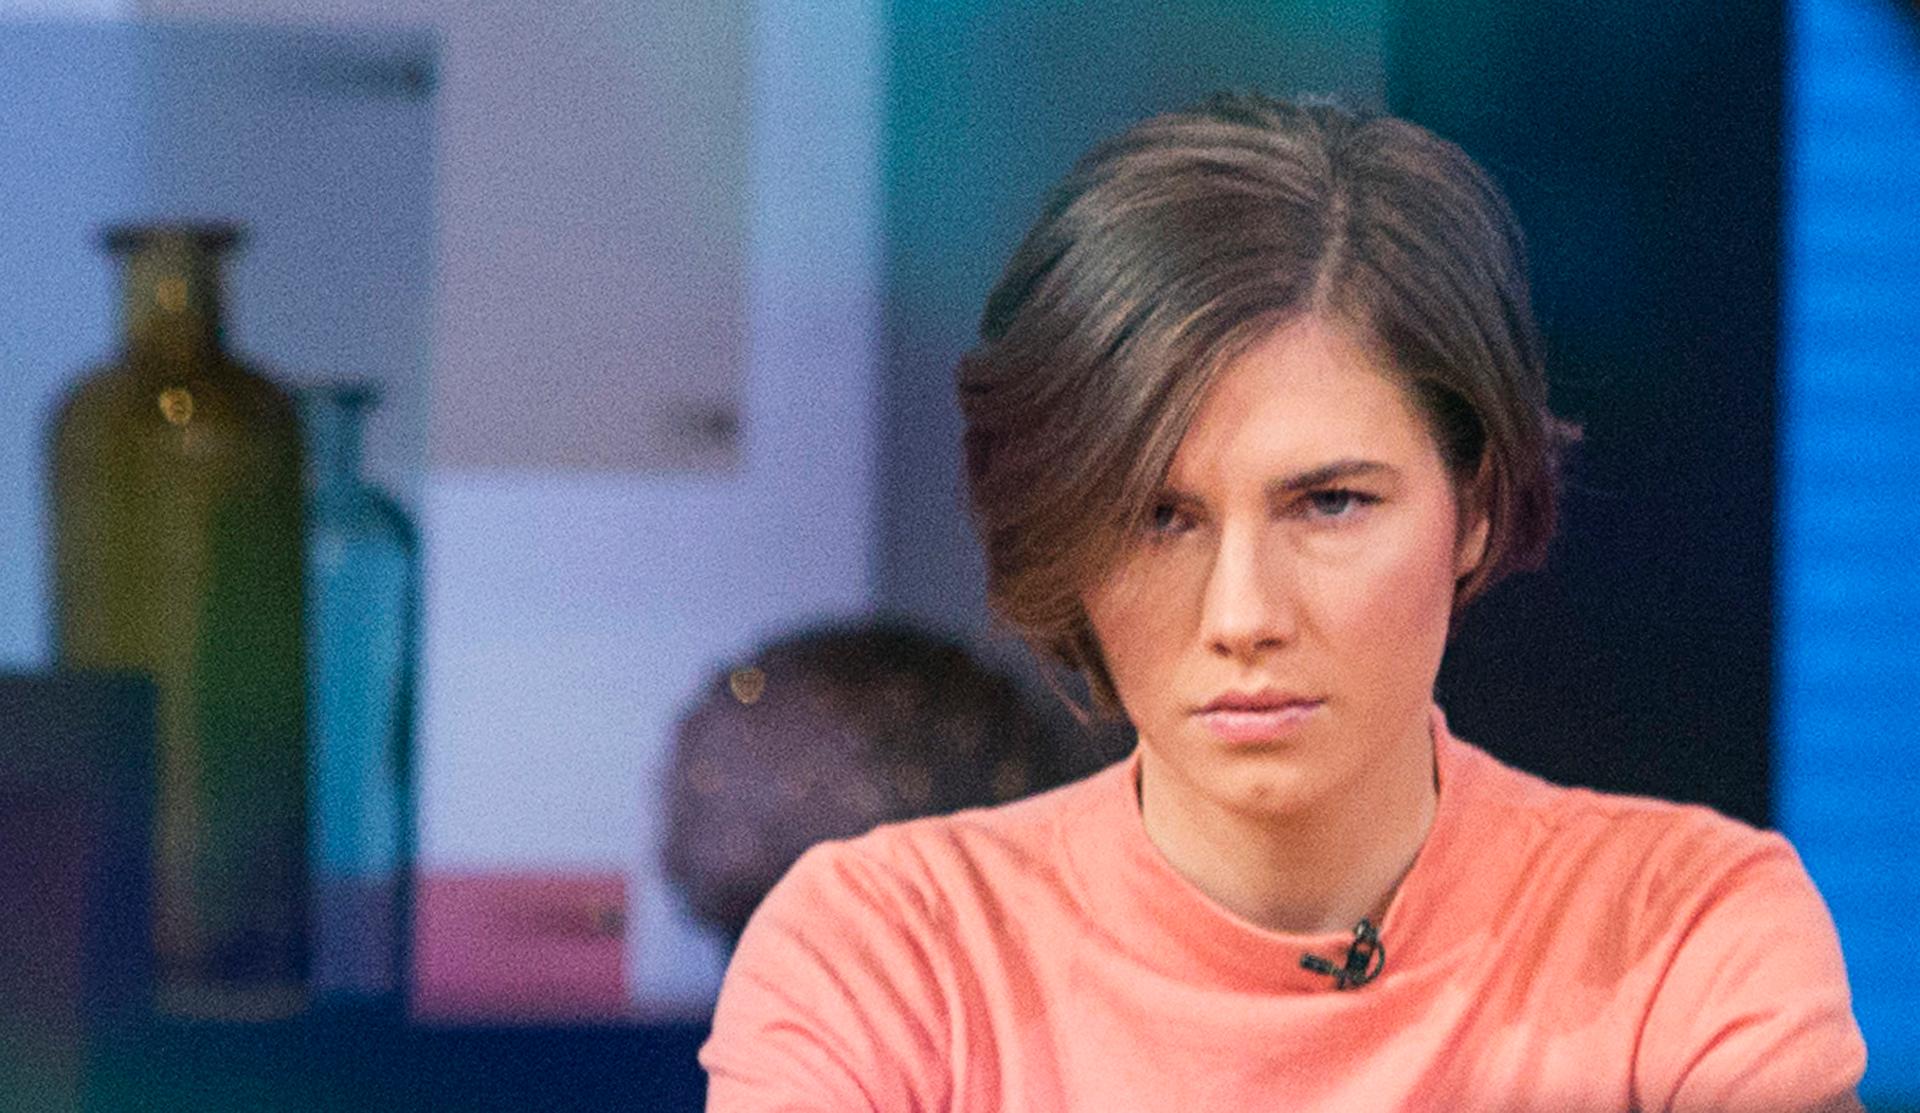 Amanda Knox sits before being interviewed on the set of ABC's "Good Morning America" in New York, January 31st 2014, a day after an Italian court upheld guilty verdicts against Knox and her former Italian boyfriend, Raffaele Sollecito, on charges of murde